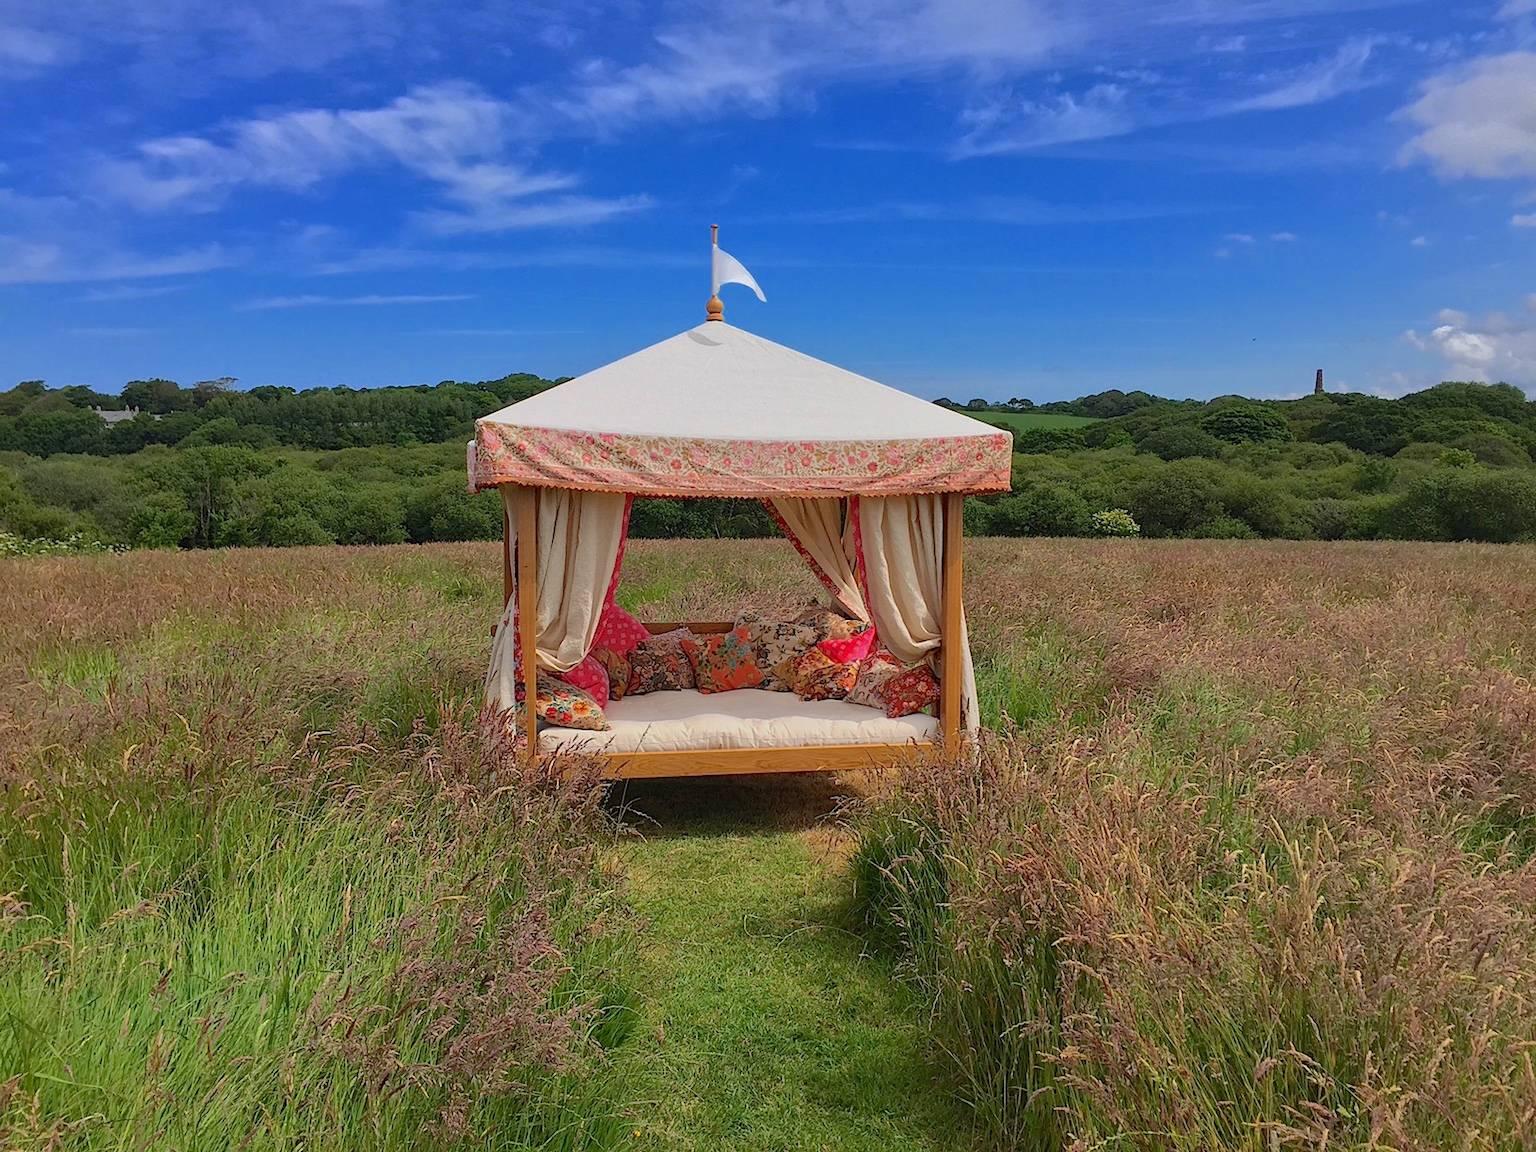 From Sunbeam Jackie the creators of the iconic Sunbeam Jackie parasol their daybed, one of the most decadent pieces of outdoor furniture available. The daybed comes made-to-order and all-inclusive of the following:

Oak frame traditionally crafted